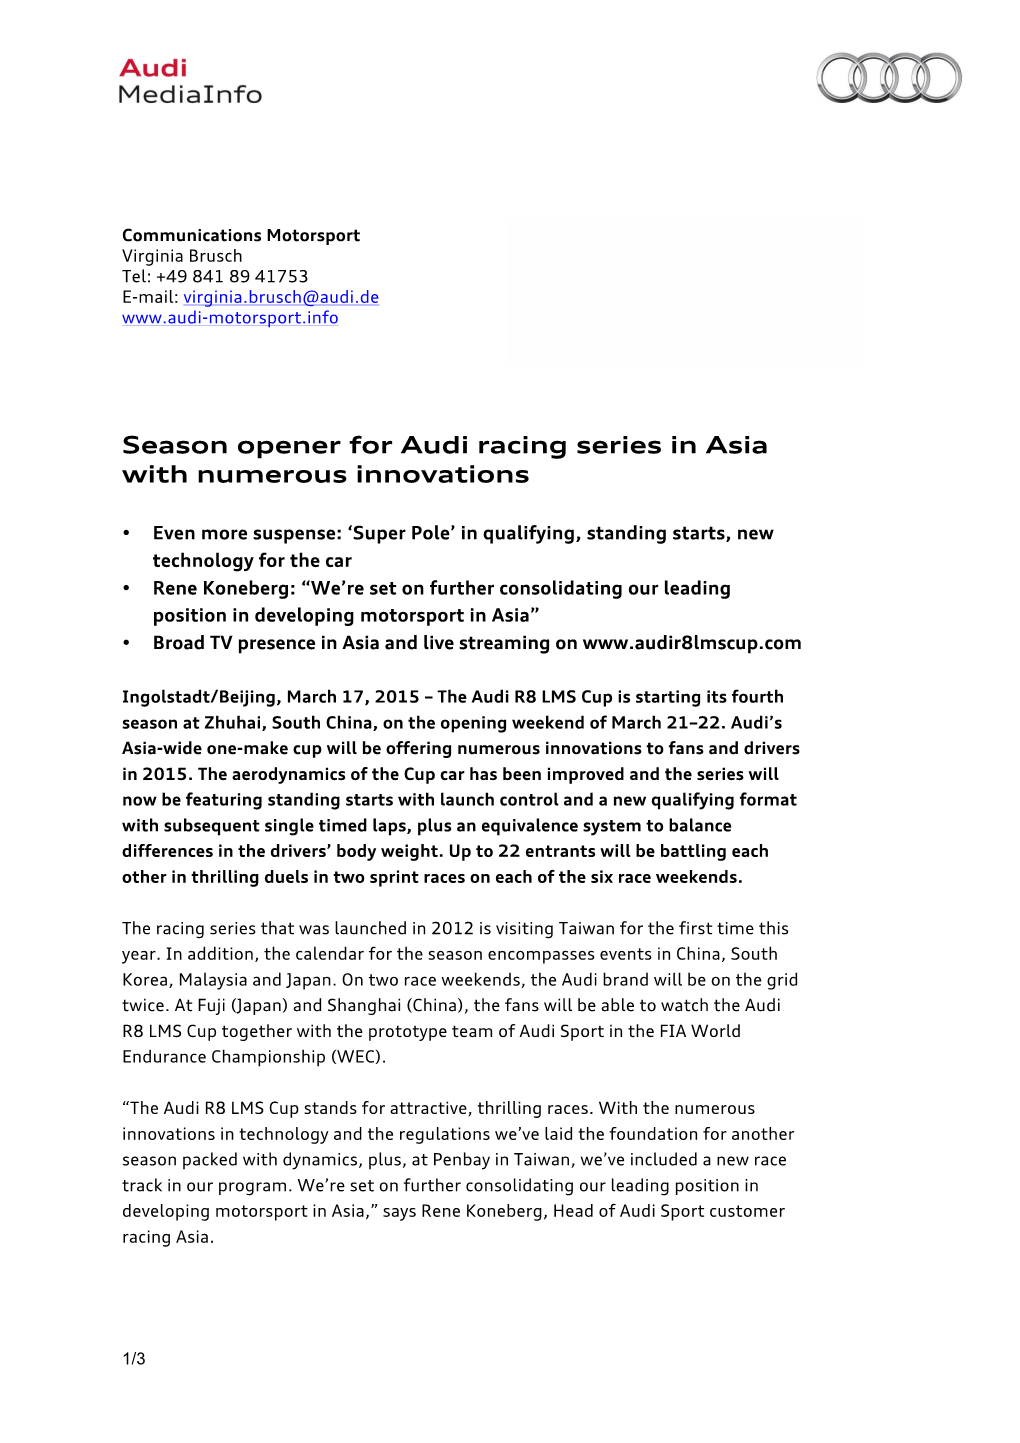 Season Opener for Audi Racing Series in Asia with Numerous Innovations